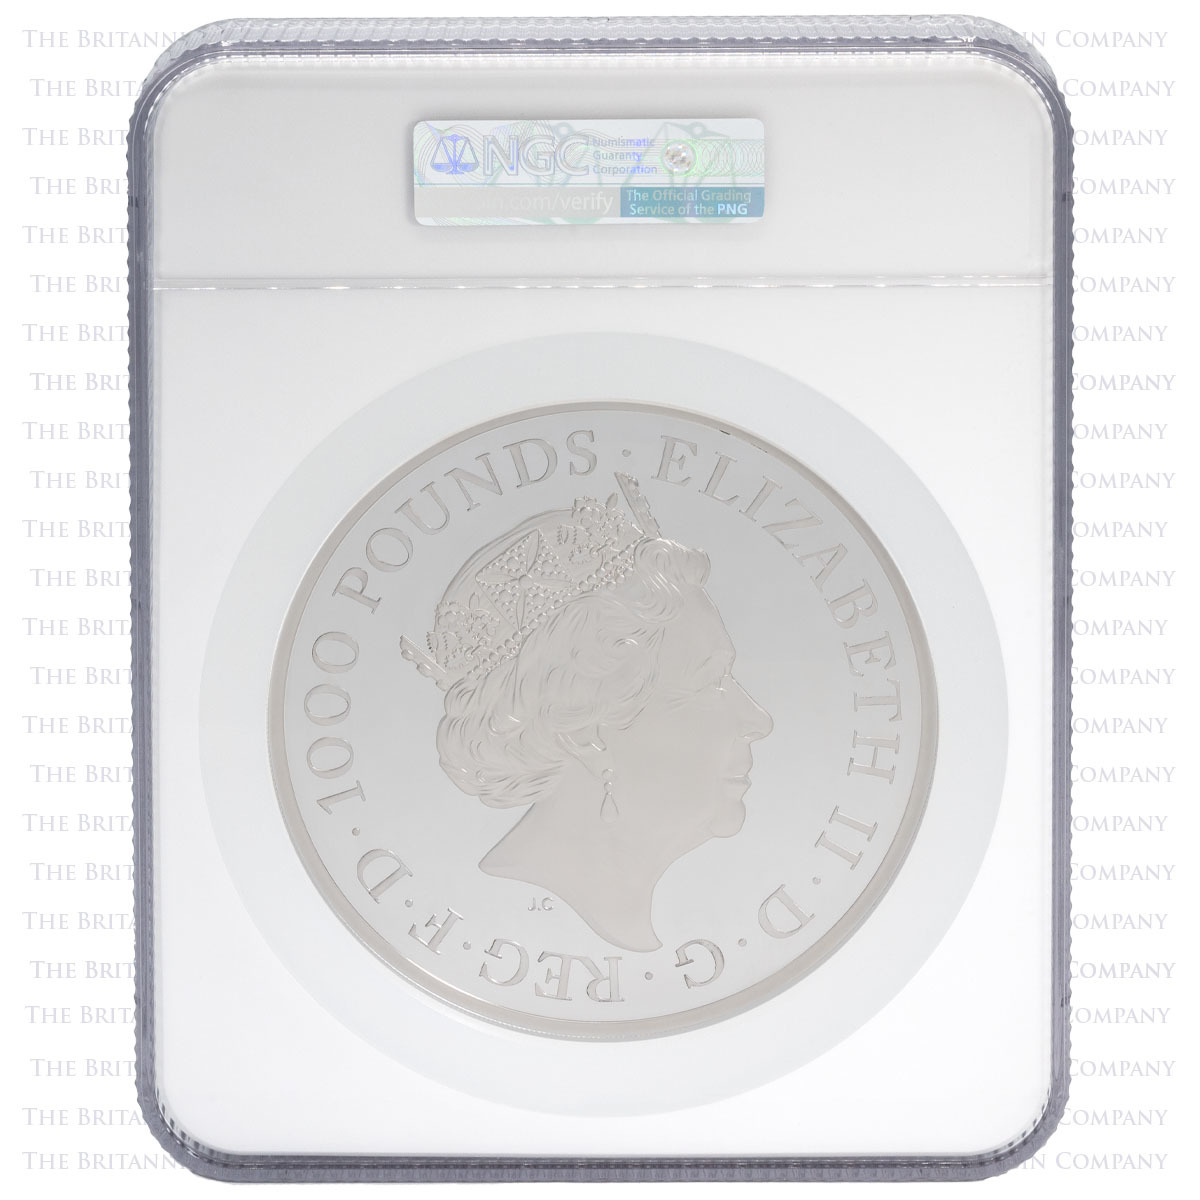 UK19UL2KS 2019 Great Engravers Una And The Lion Two Kilogram Silver Proof Coin NGC Graded PF 70 Ultra Cameo Obverse